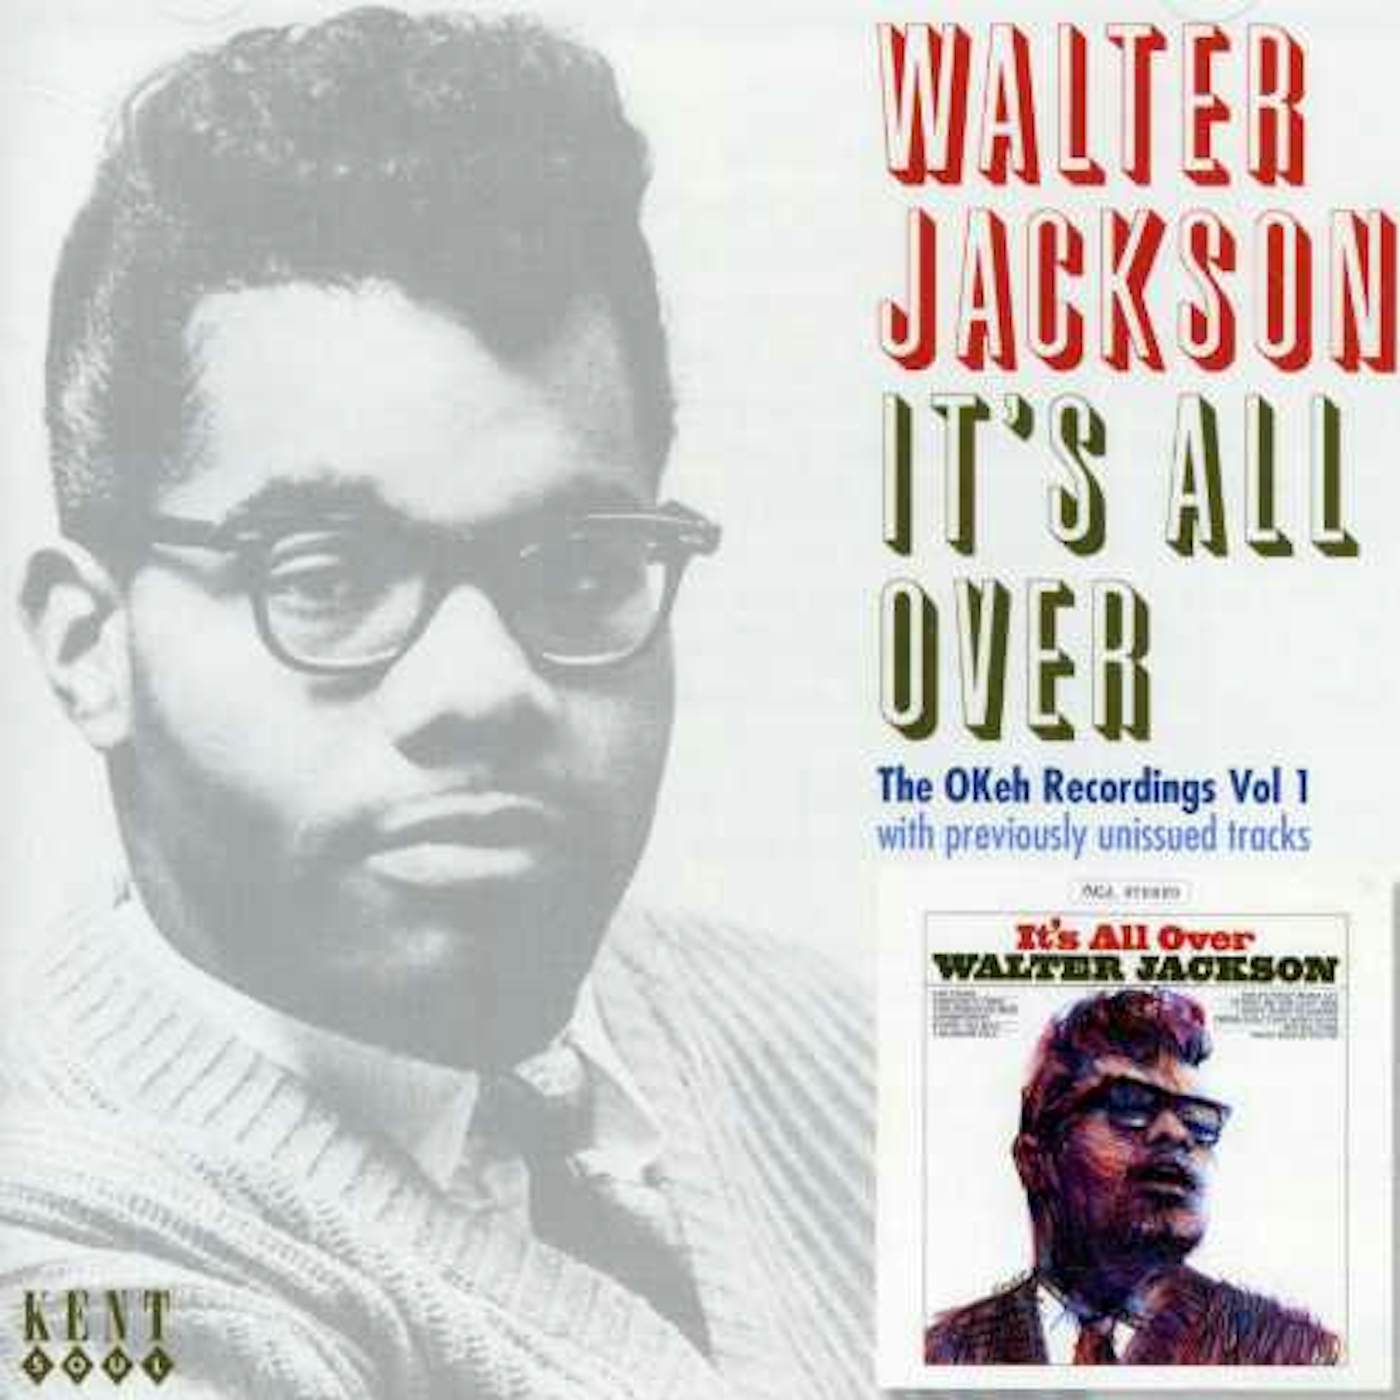 Walter Jackson IT'S ALL OVER: THE OKEY RECORDINGS 1 CD